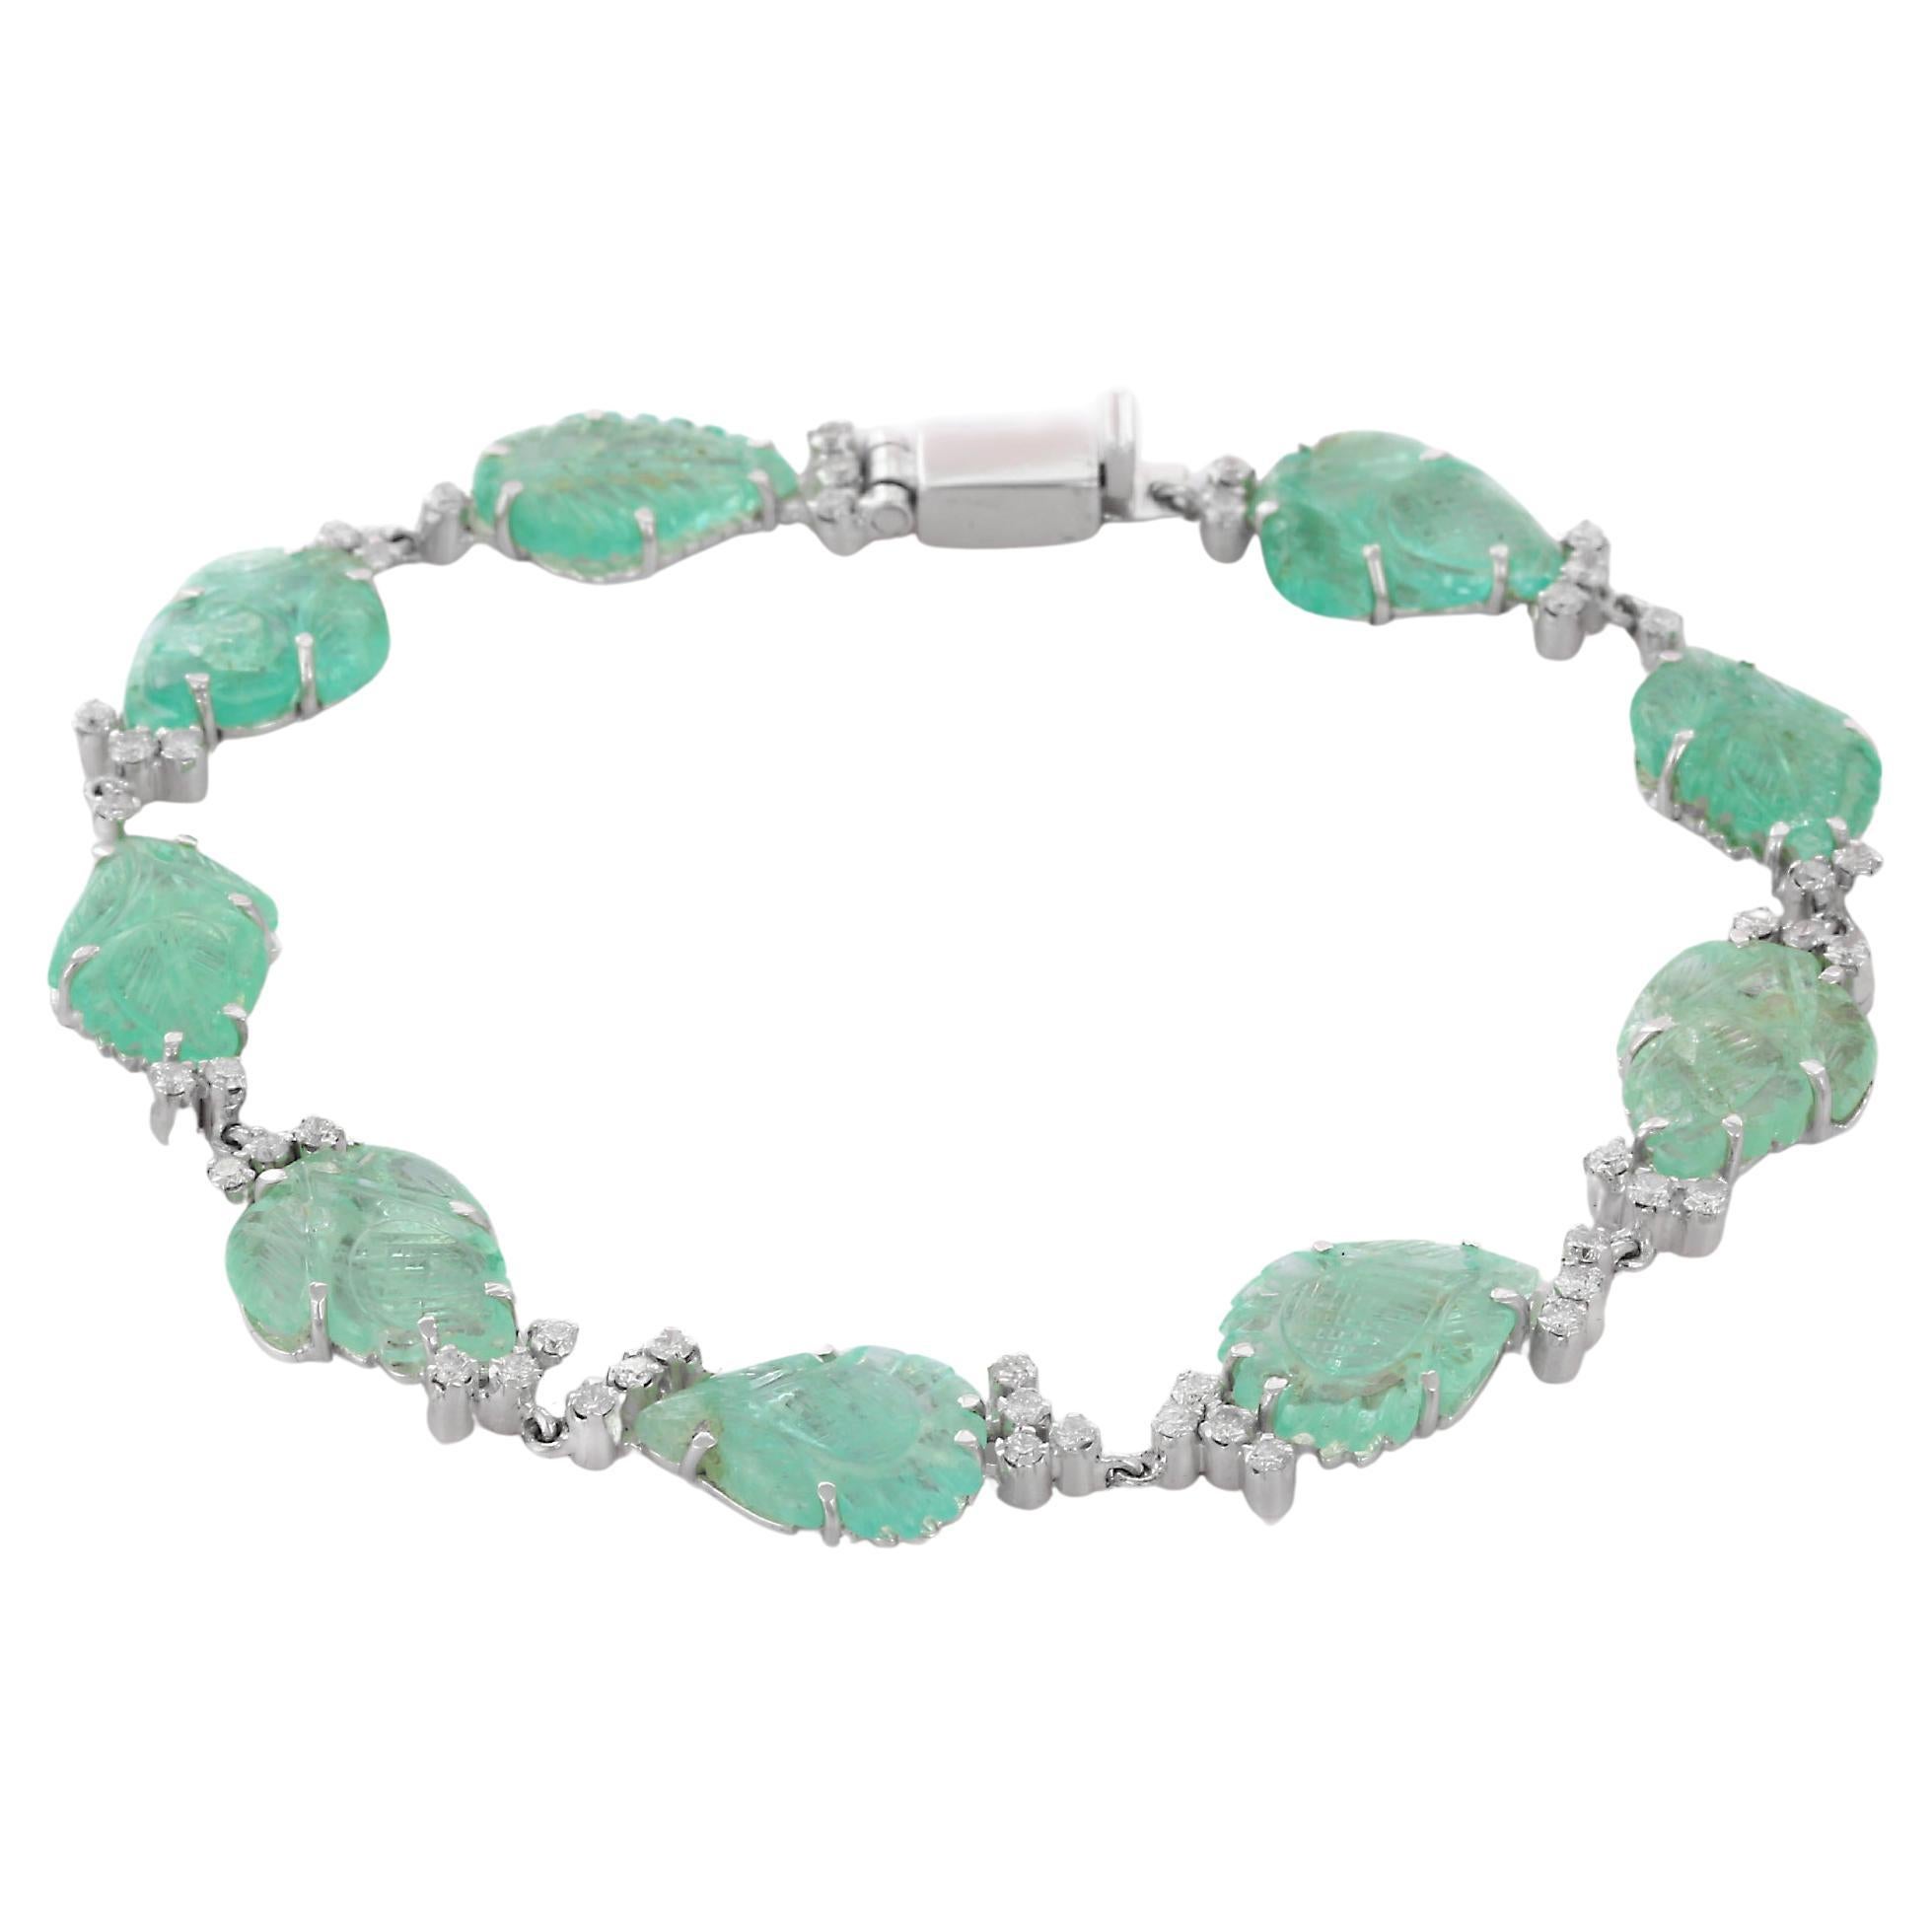 18.8 Ct Unique Carved Raw Emerald Bracelet in 18K White Gold with Diamonds